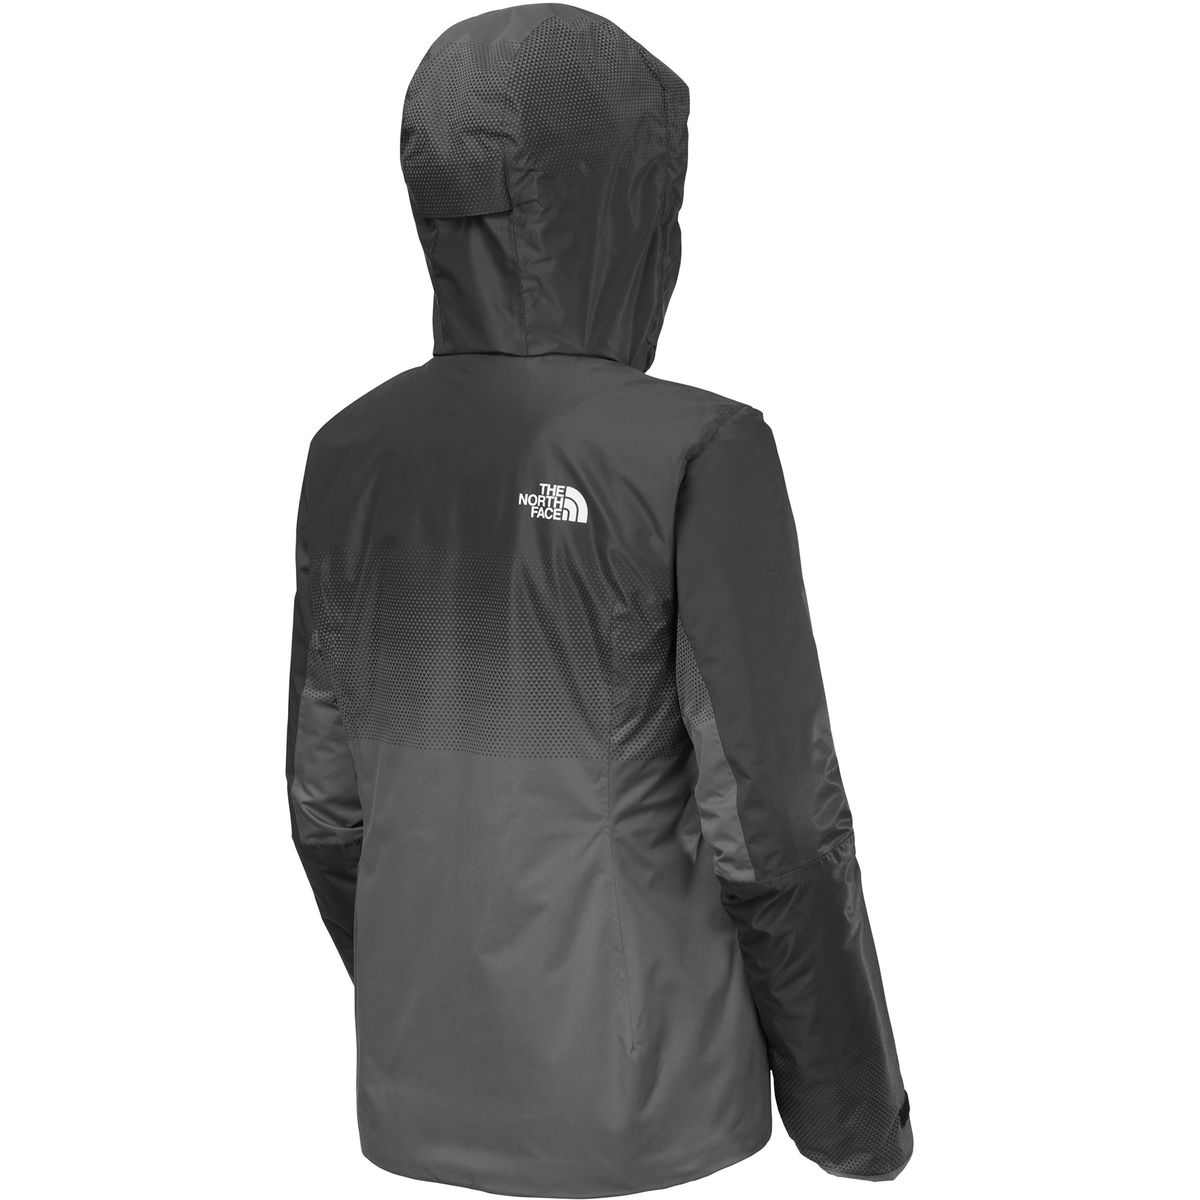 The Face Fuseform Matrix Insulated Jacket - Women's - Clothing